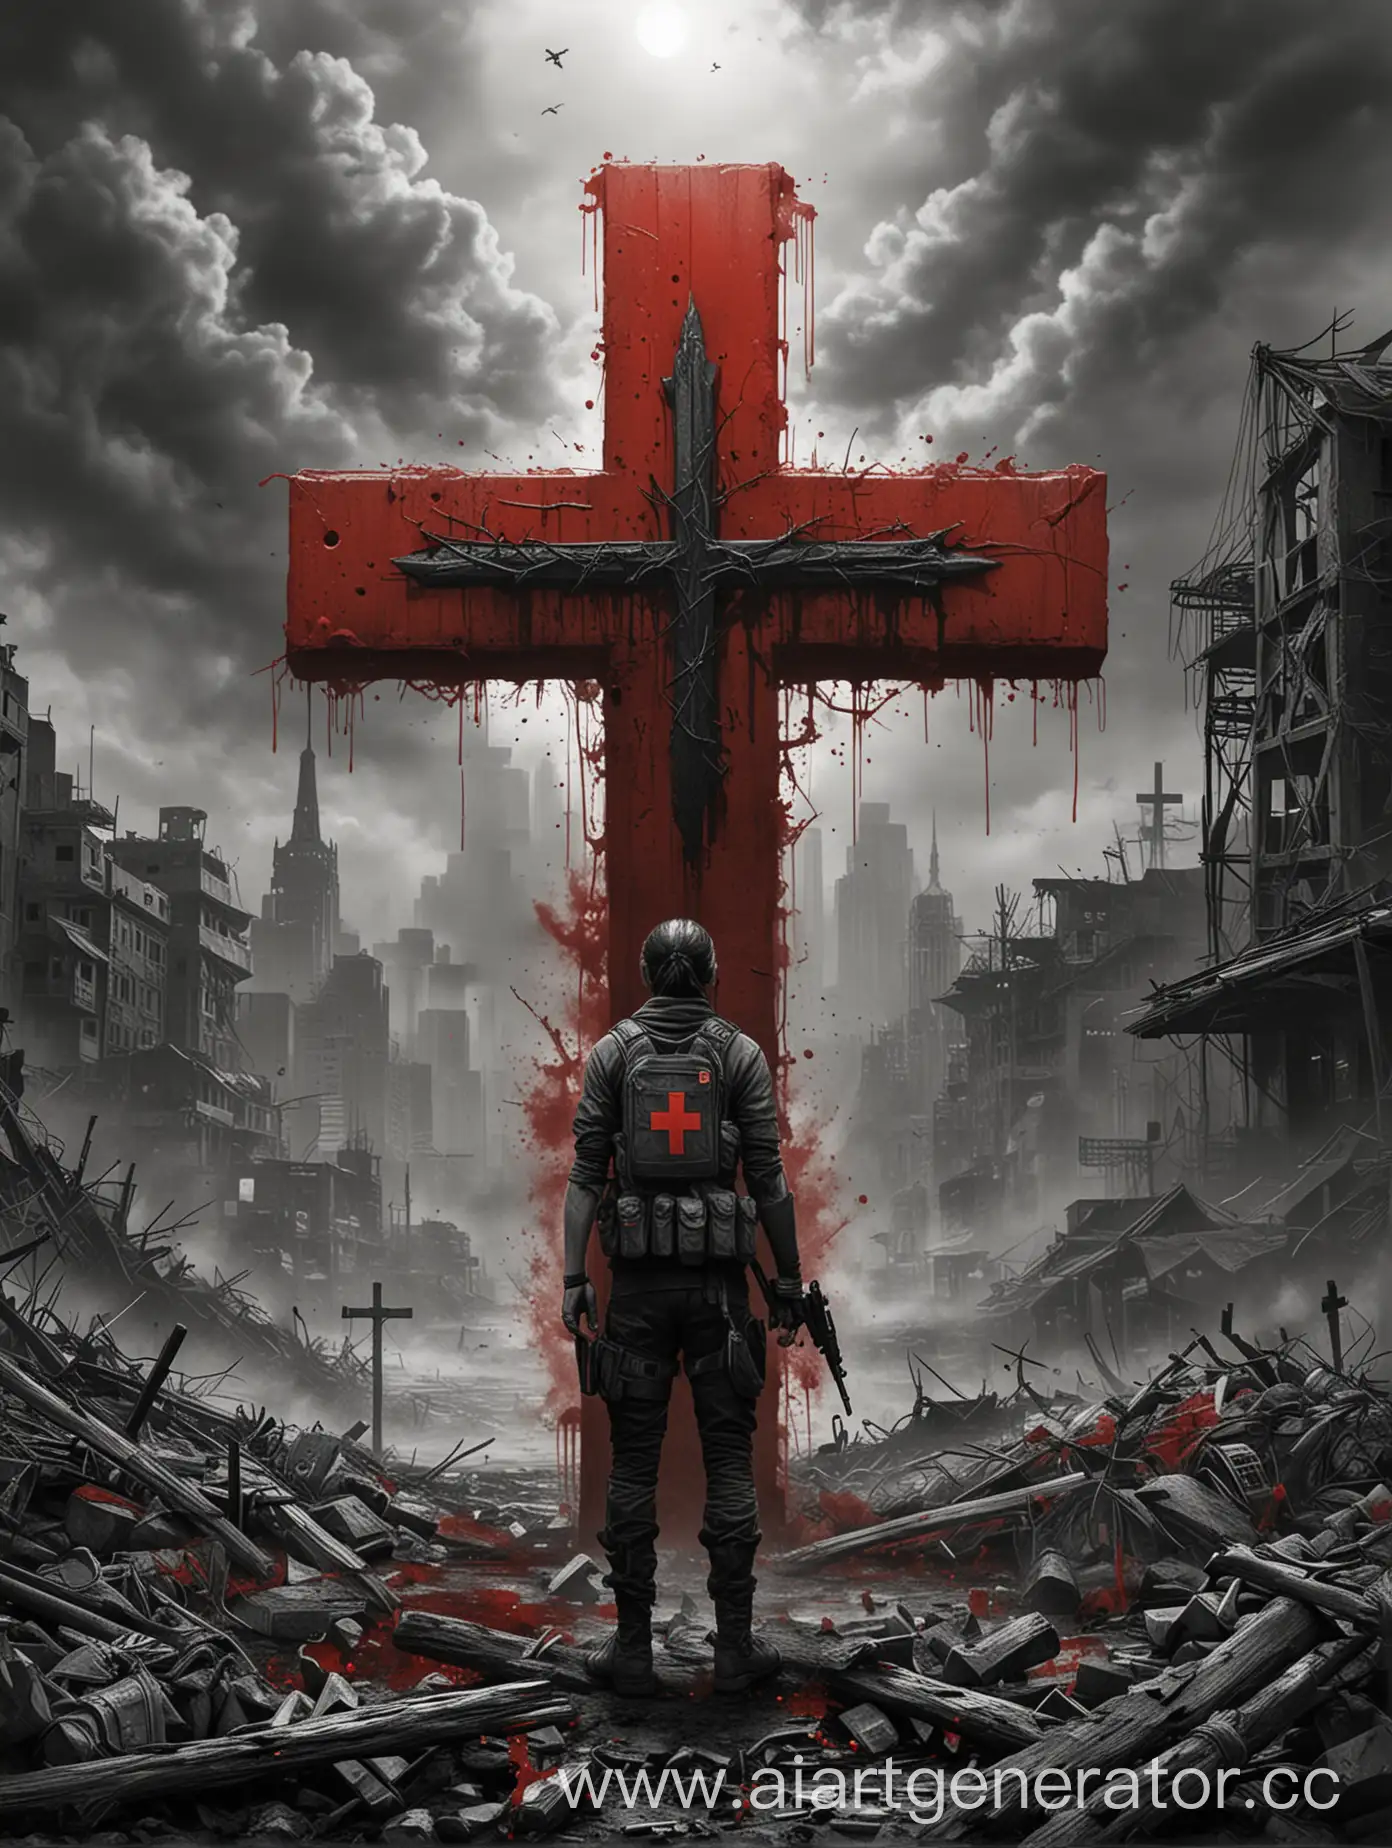 BlackRed-PostApocalyptic-Cover-Art-Featuring-Red-Cross